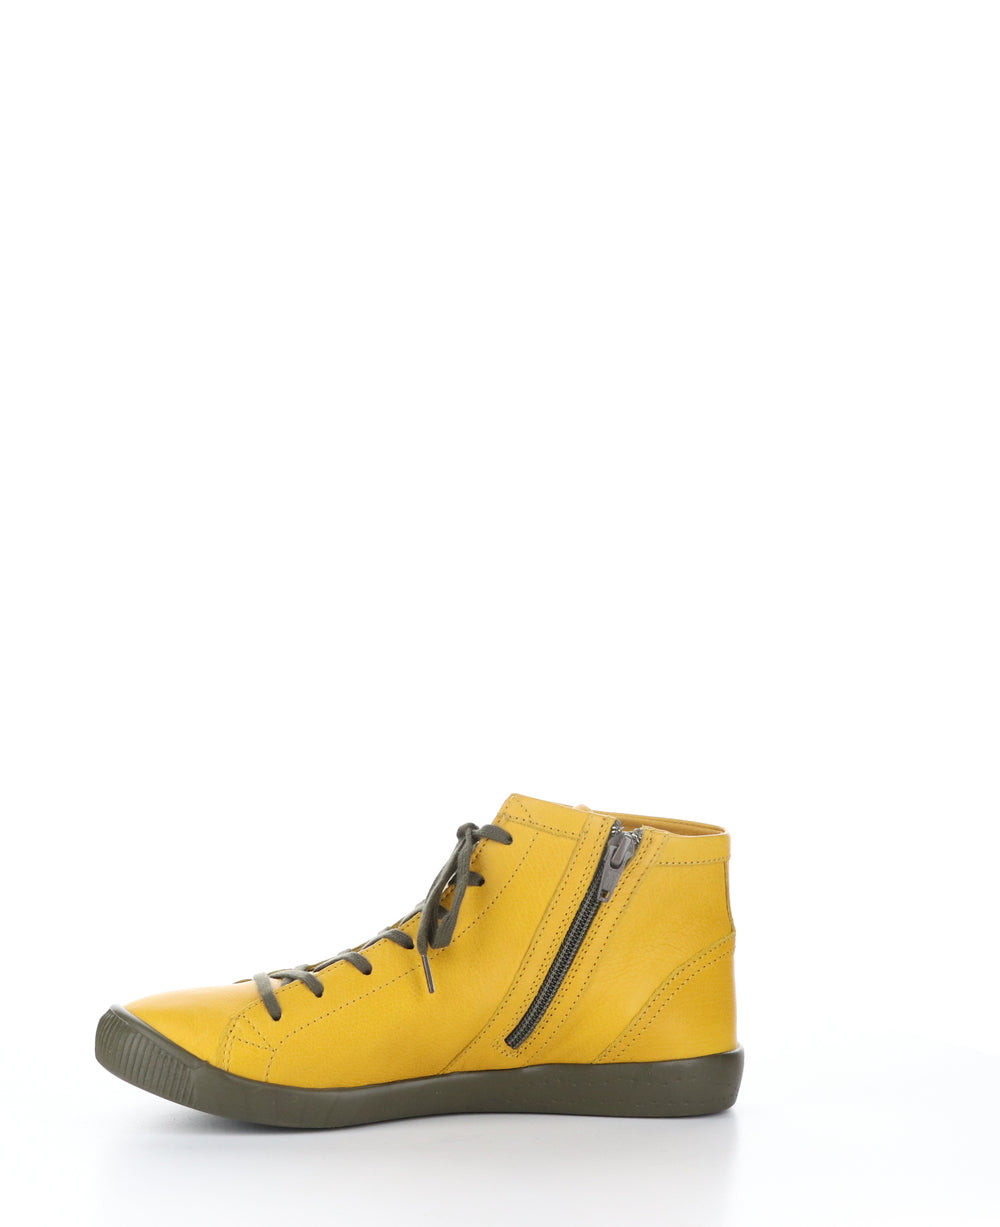 IBBI653SOF Ochre Round Toe Shoes|IBBI653SOF Chaussures à Bout Rond in Jaune